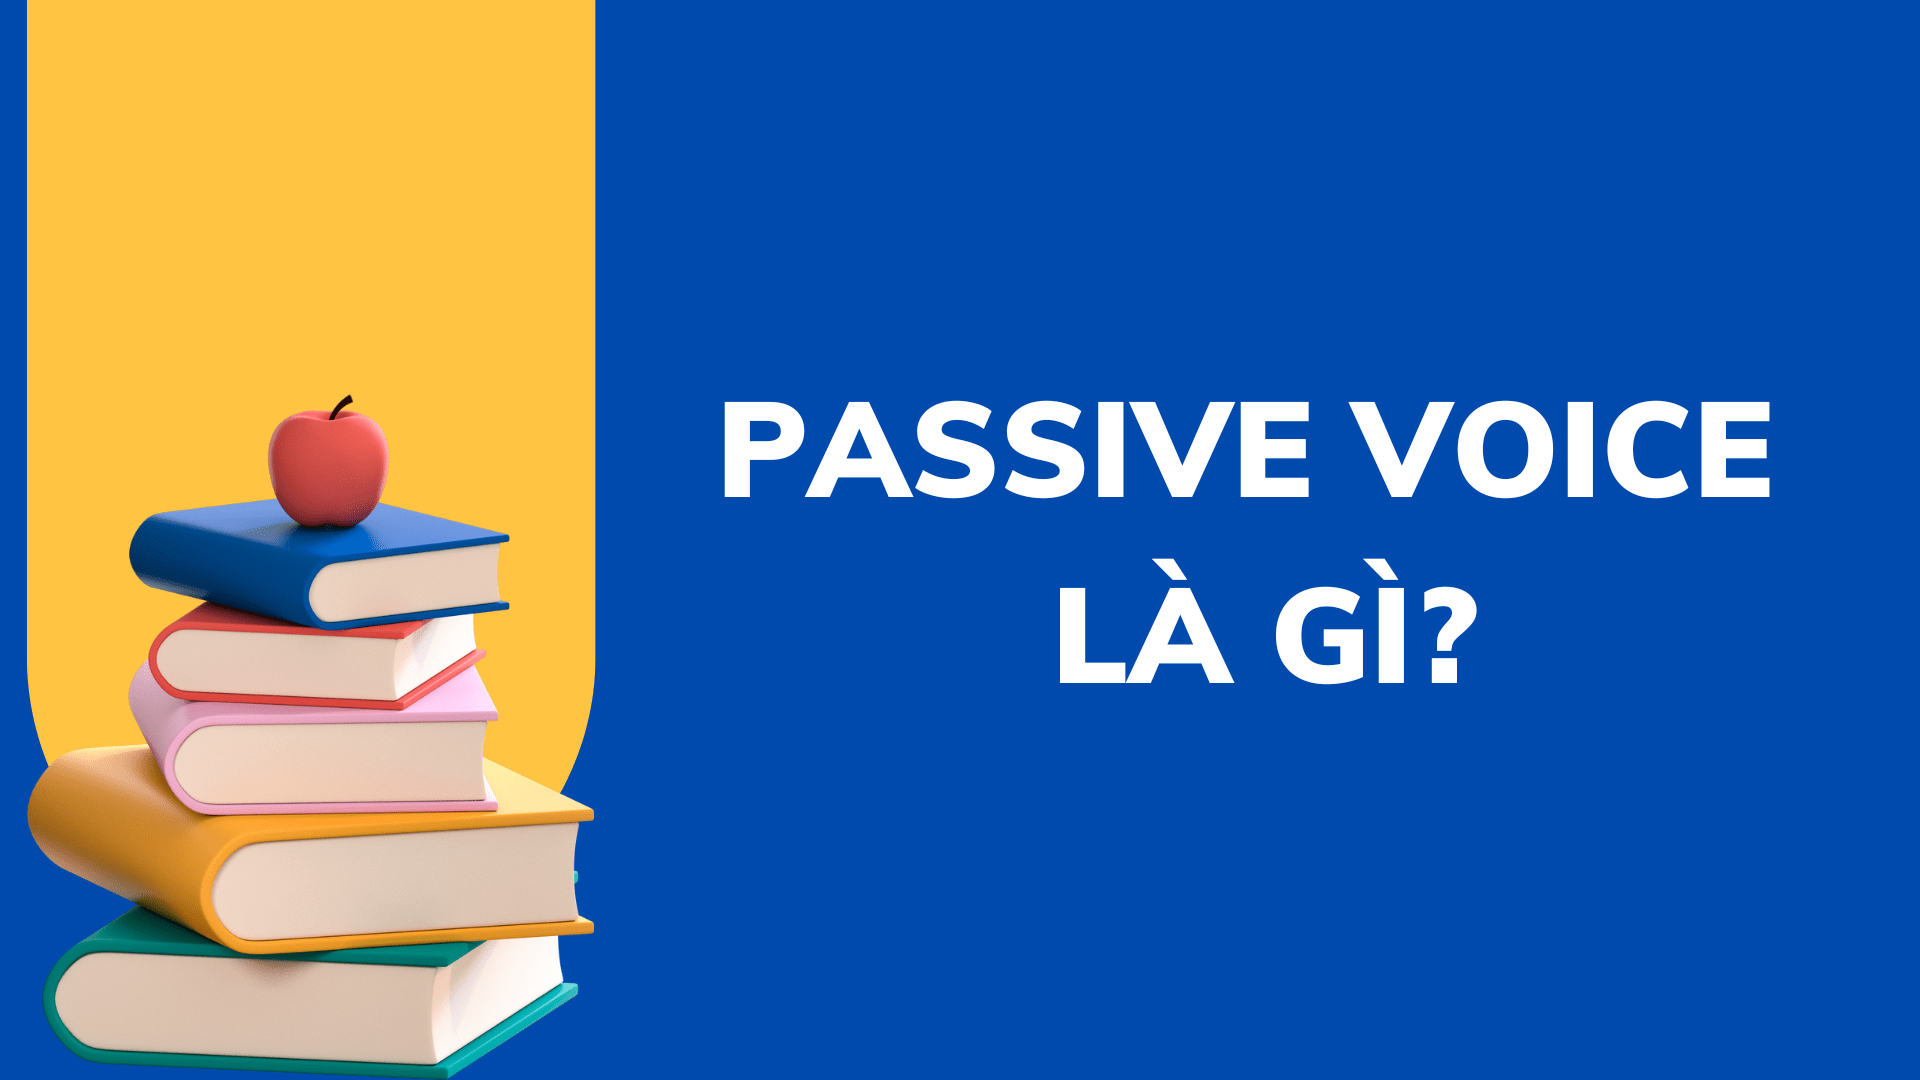 vị trí của by trong passive voice